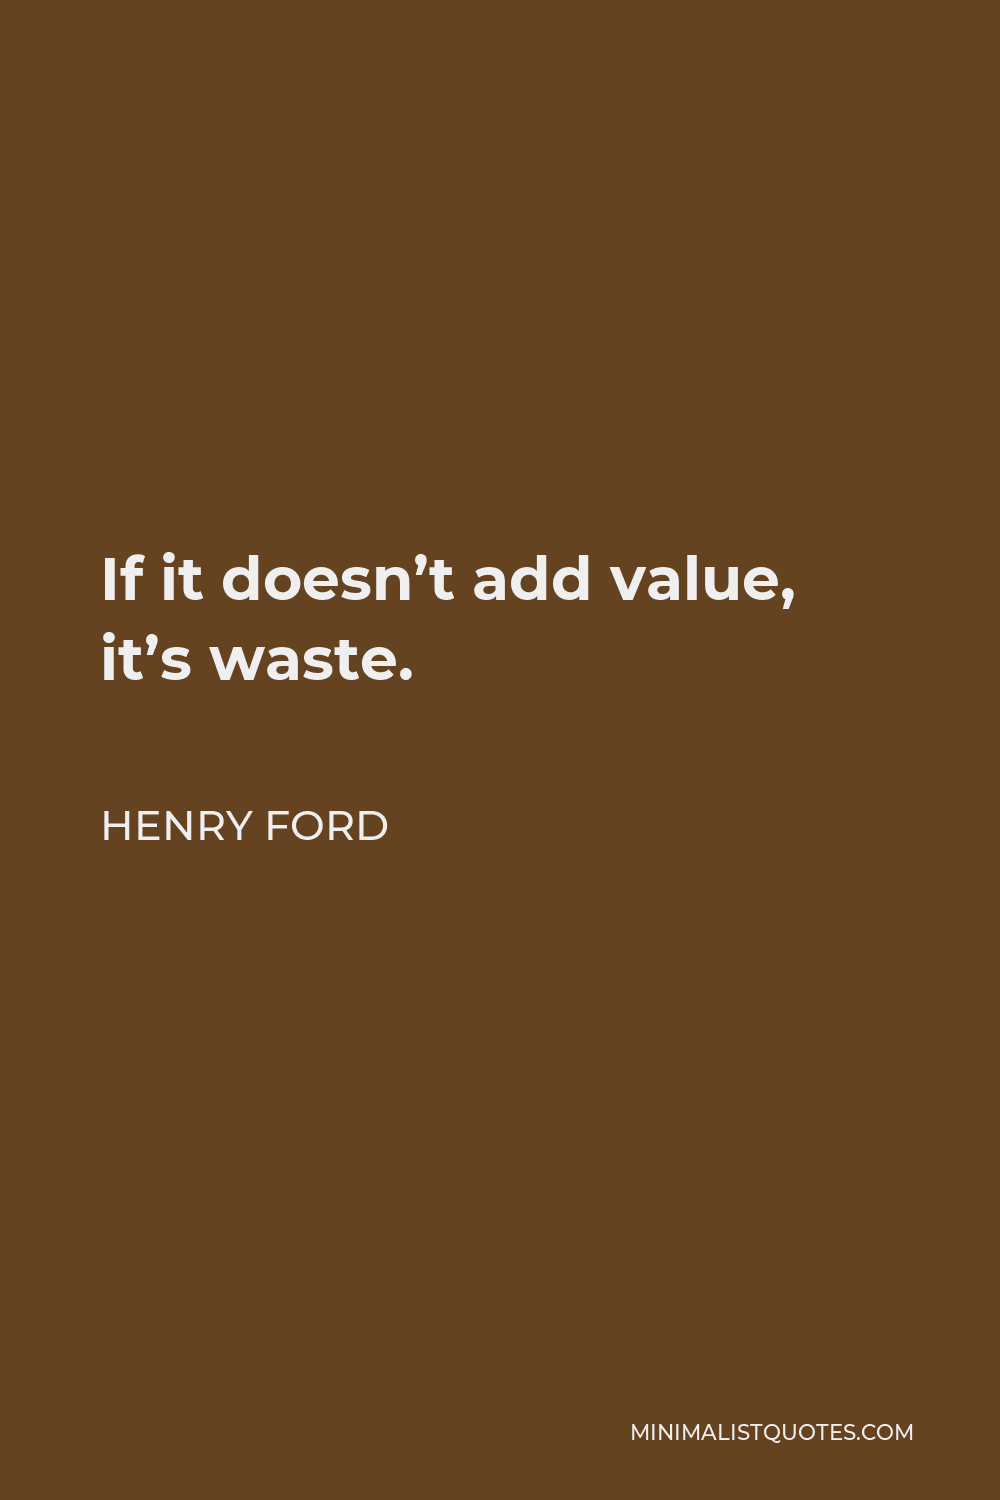 Henry Ford Quote - If it doesn’t add value, it’s waste.